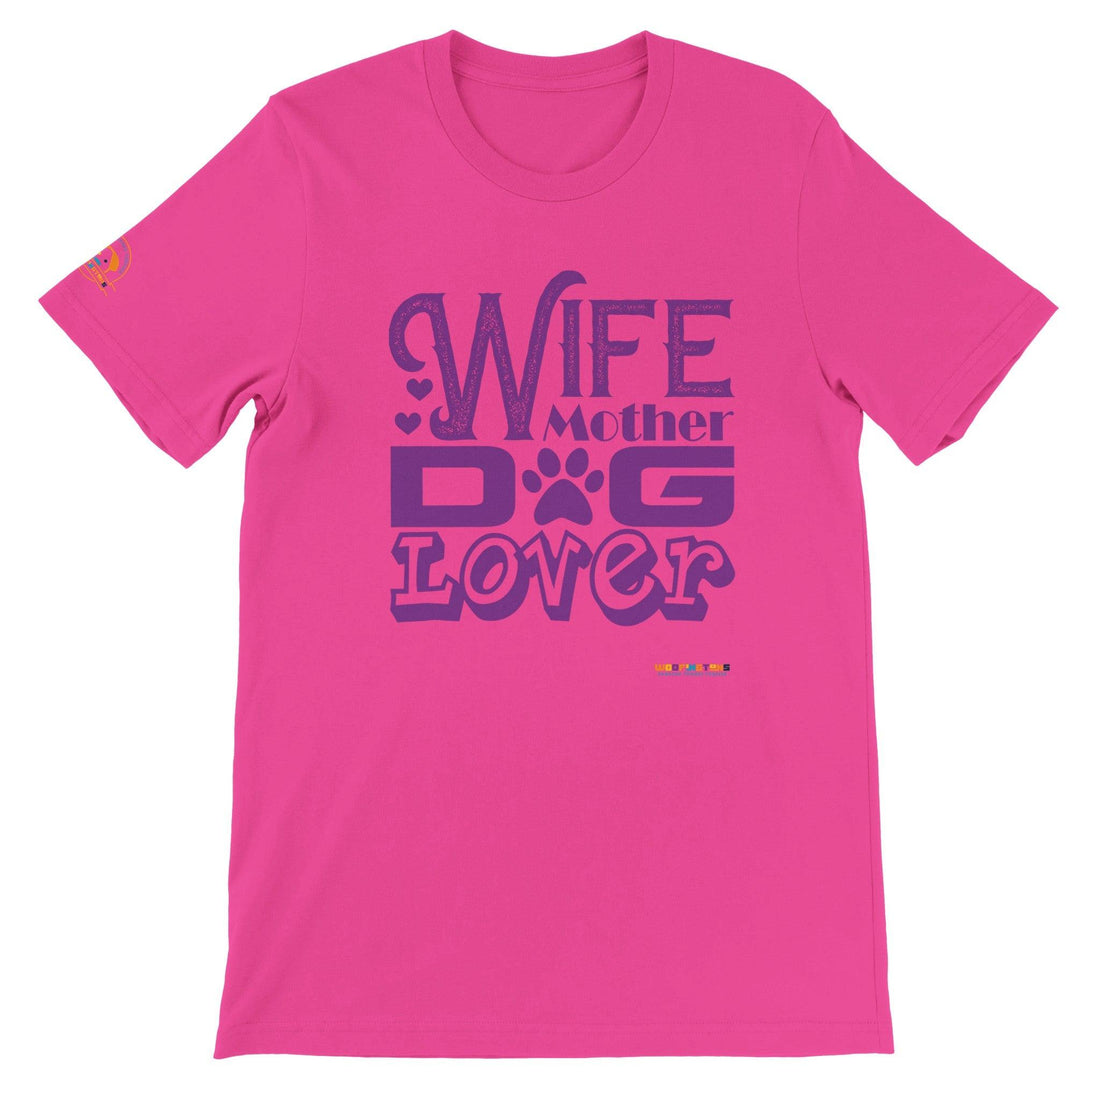 Wife Mother Dog Lover T-shirt - Woofingtons